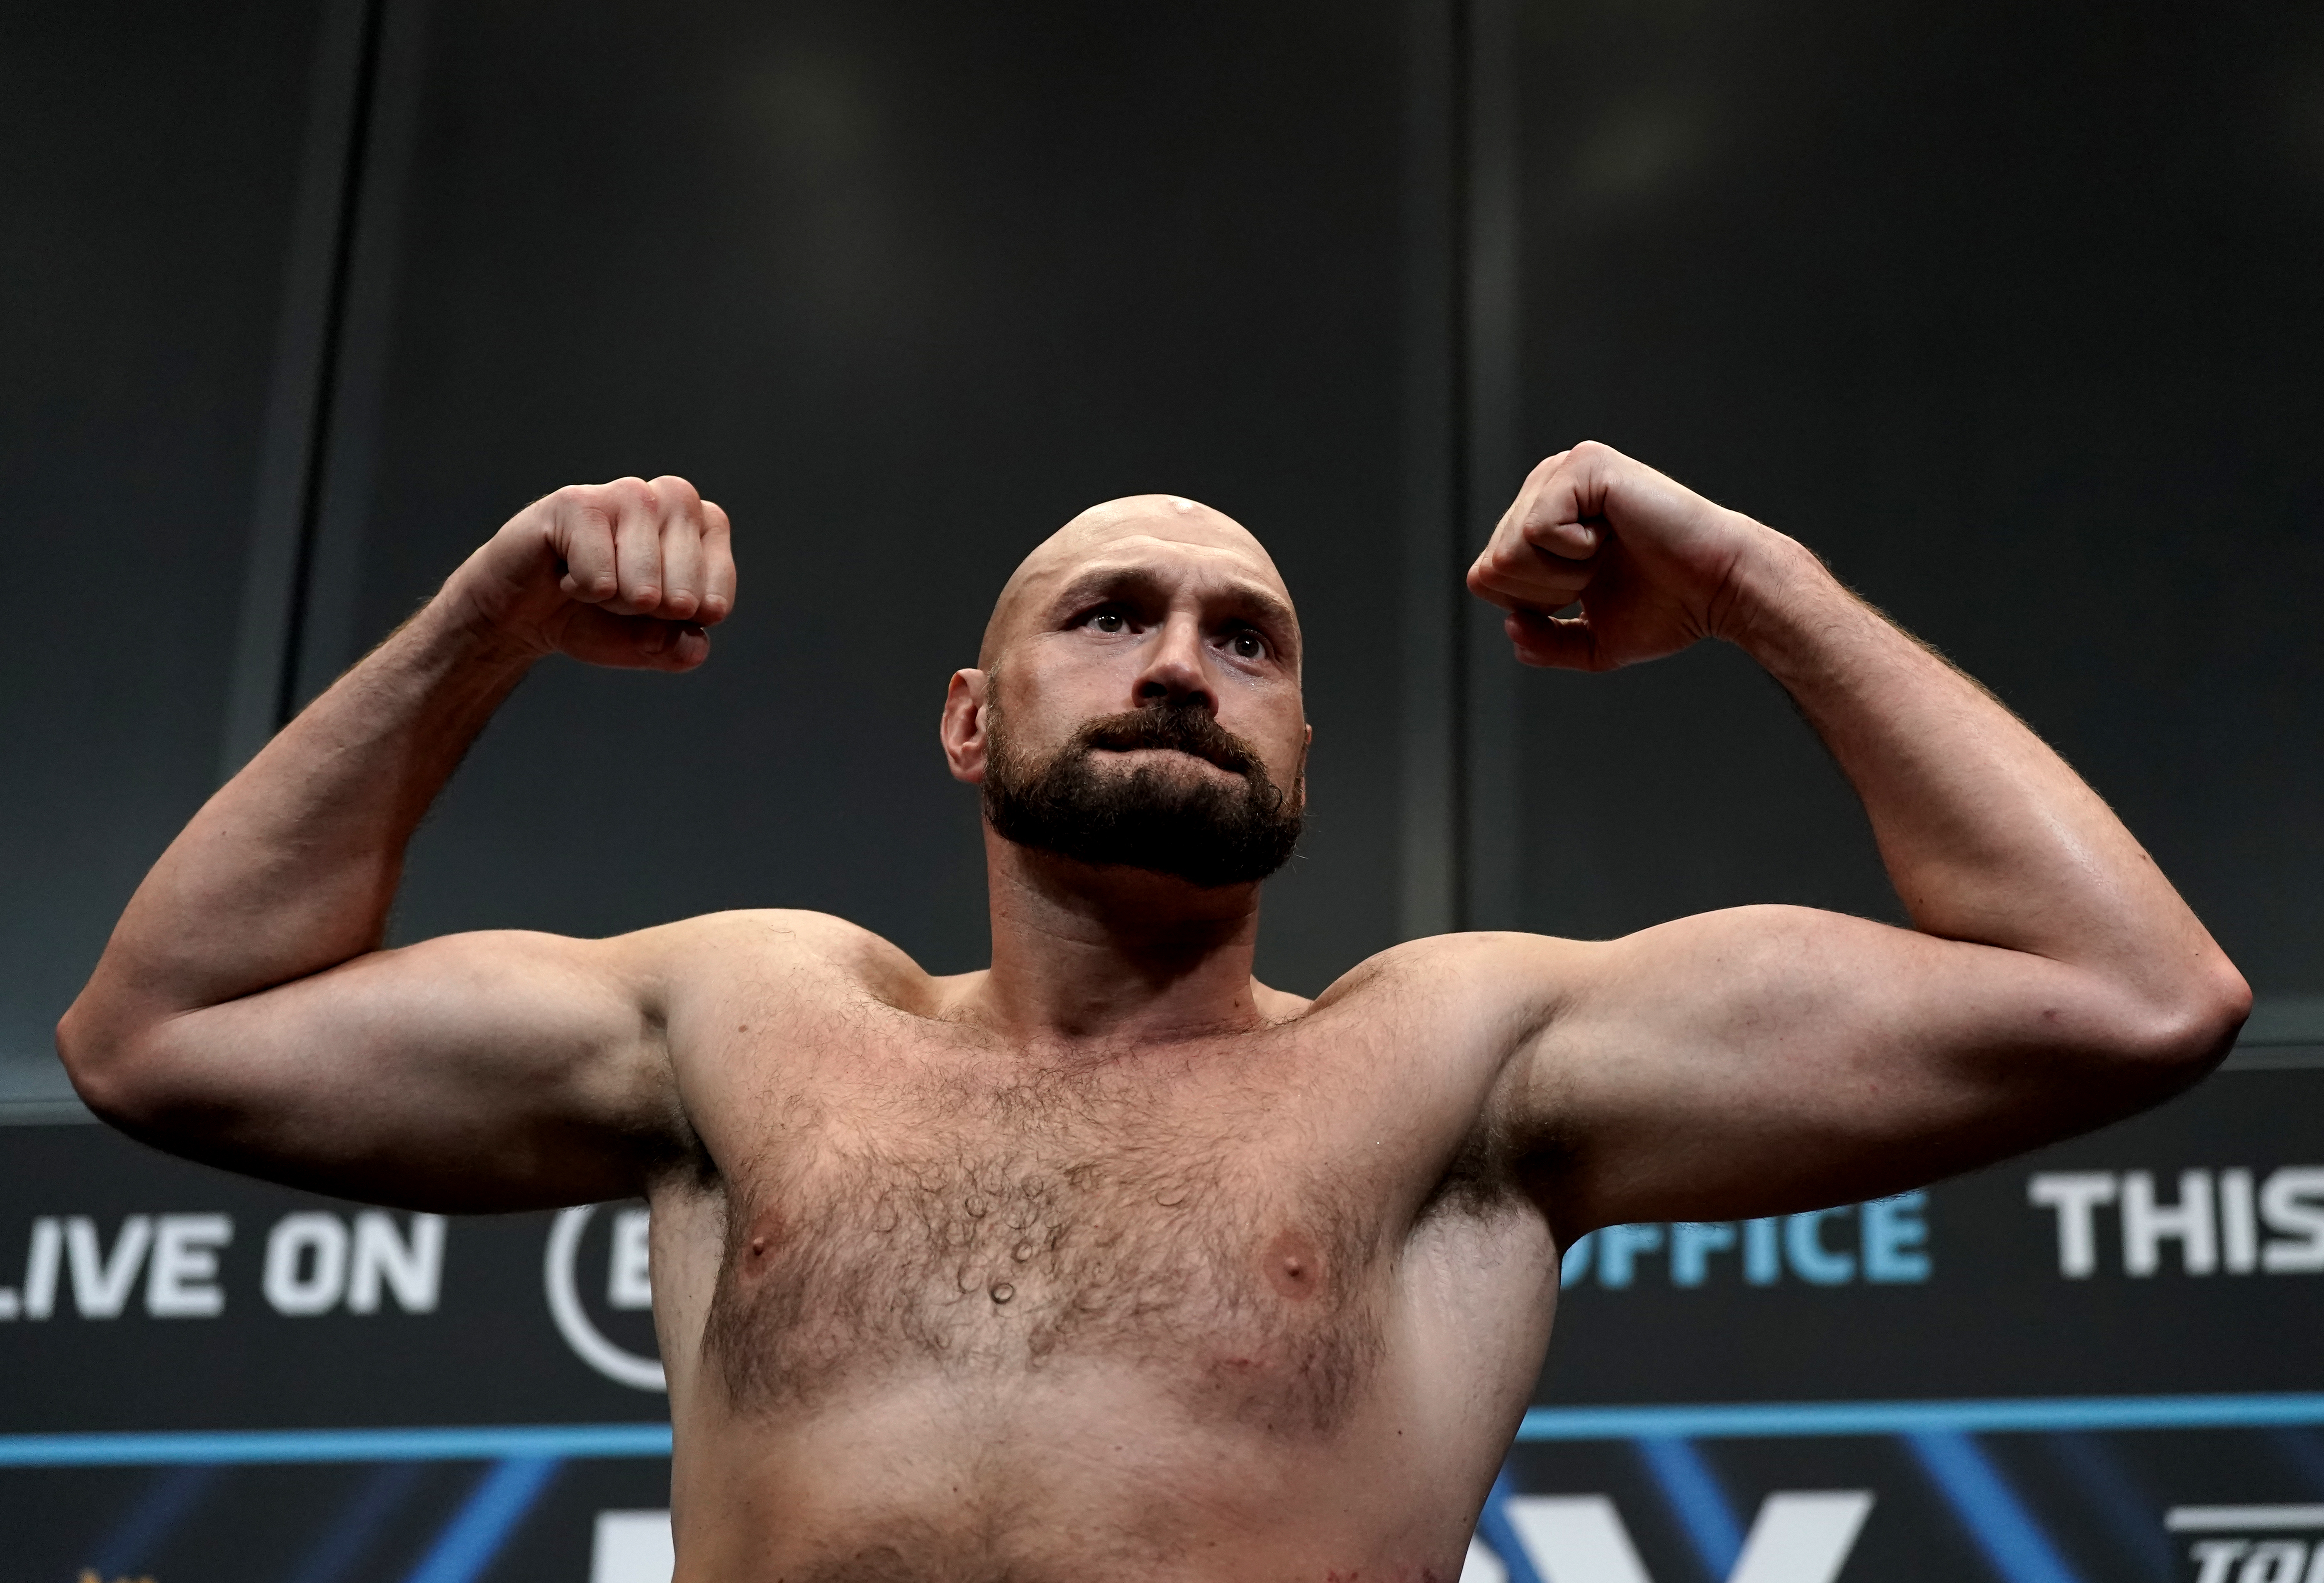 Tyson Fury says professional boxing is over but refuses to rule out returning for exhibition matches ITV News Granada